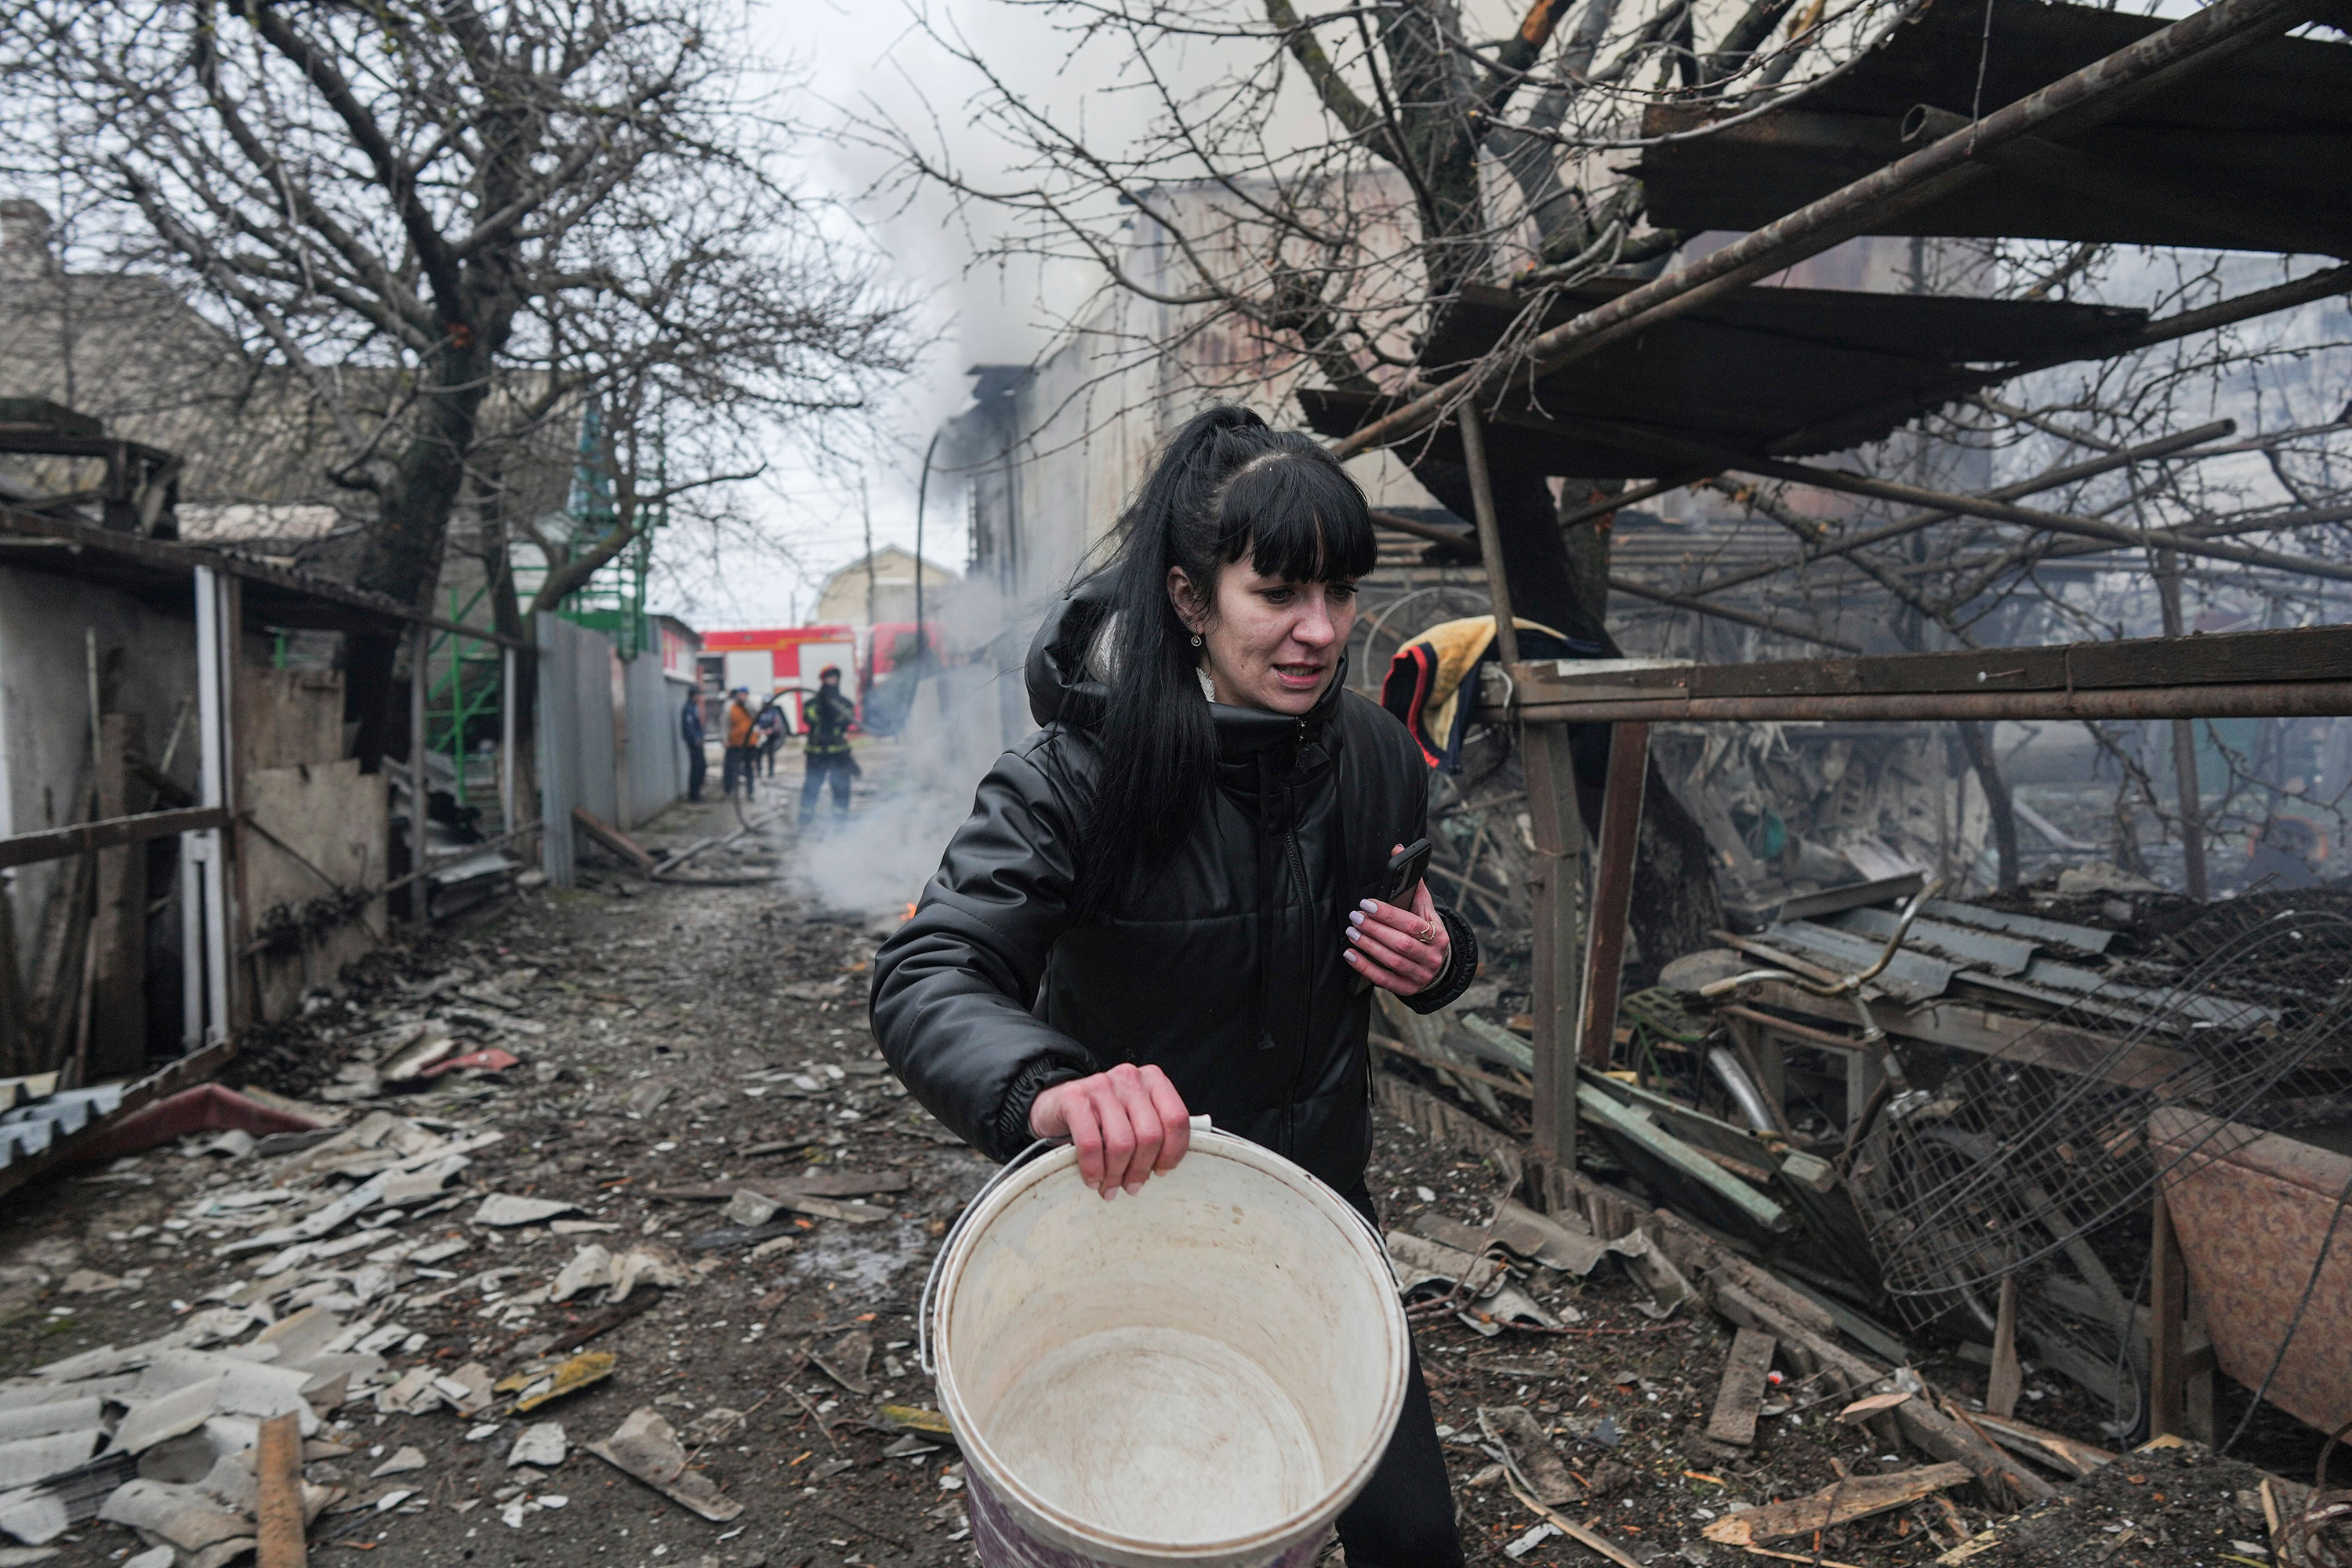 A woman walks past debris in the aftermath of shelling in Mariupol, Ukraine, on February 24.